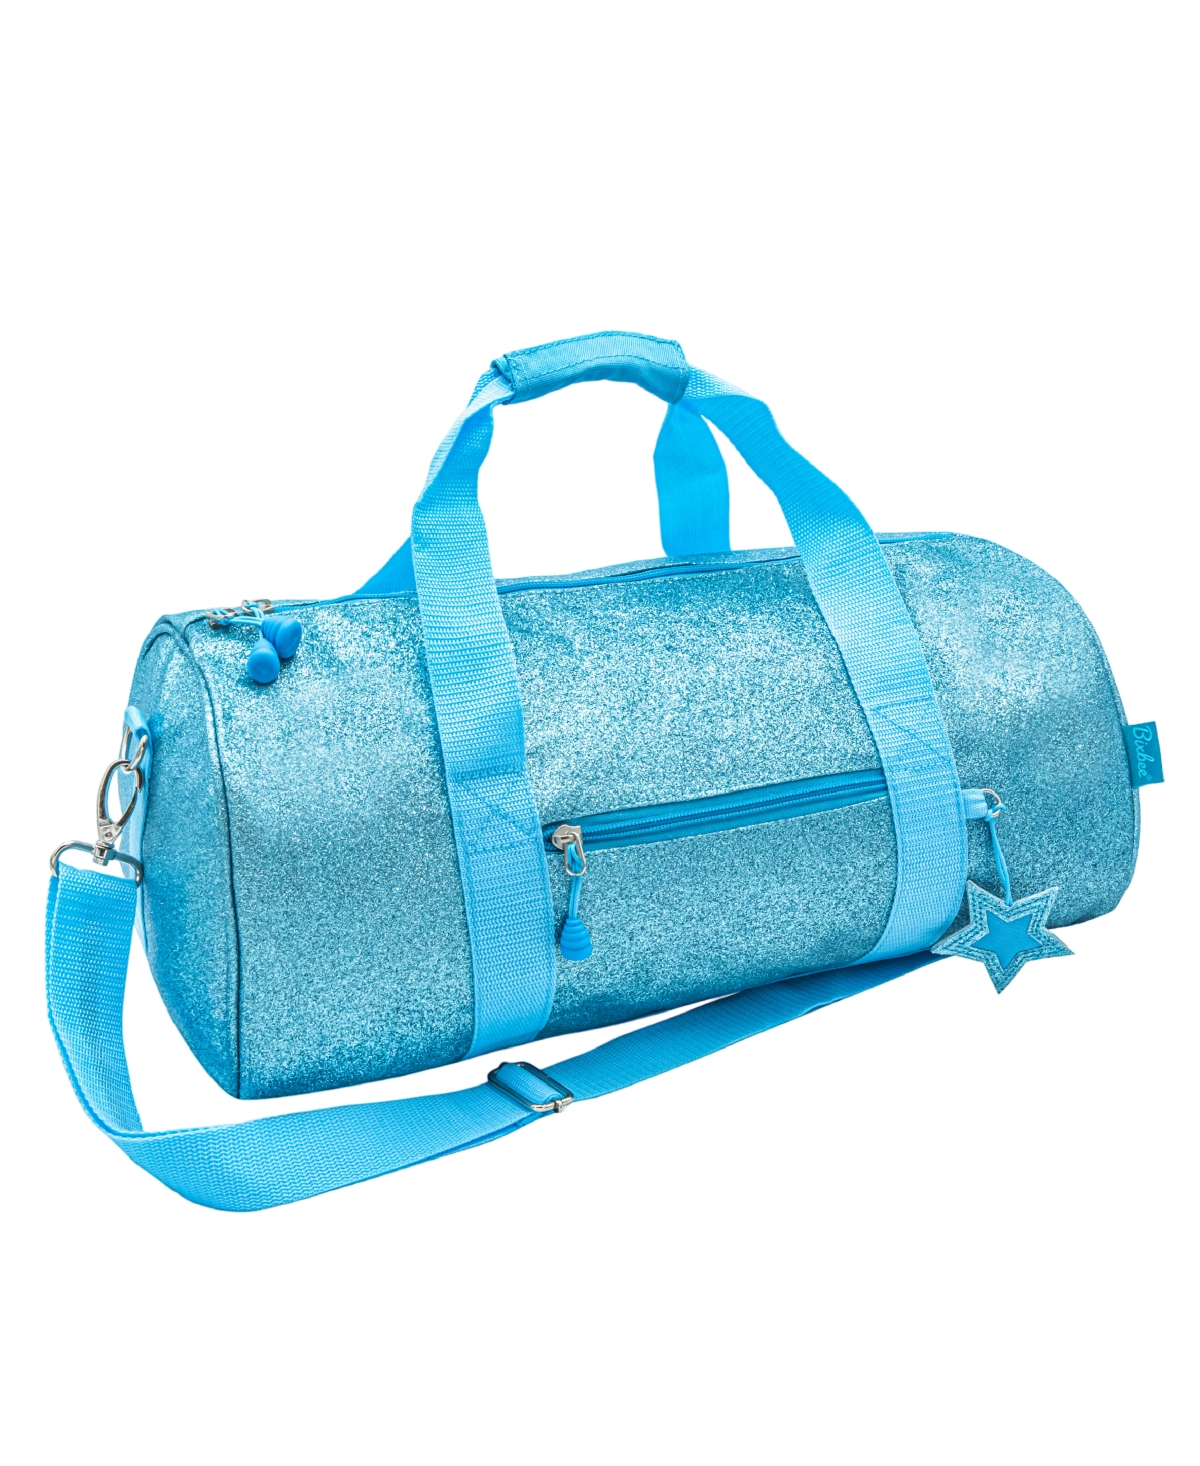 Sparkalicious Turquoise Duffle Bag - Turquoise